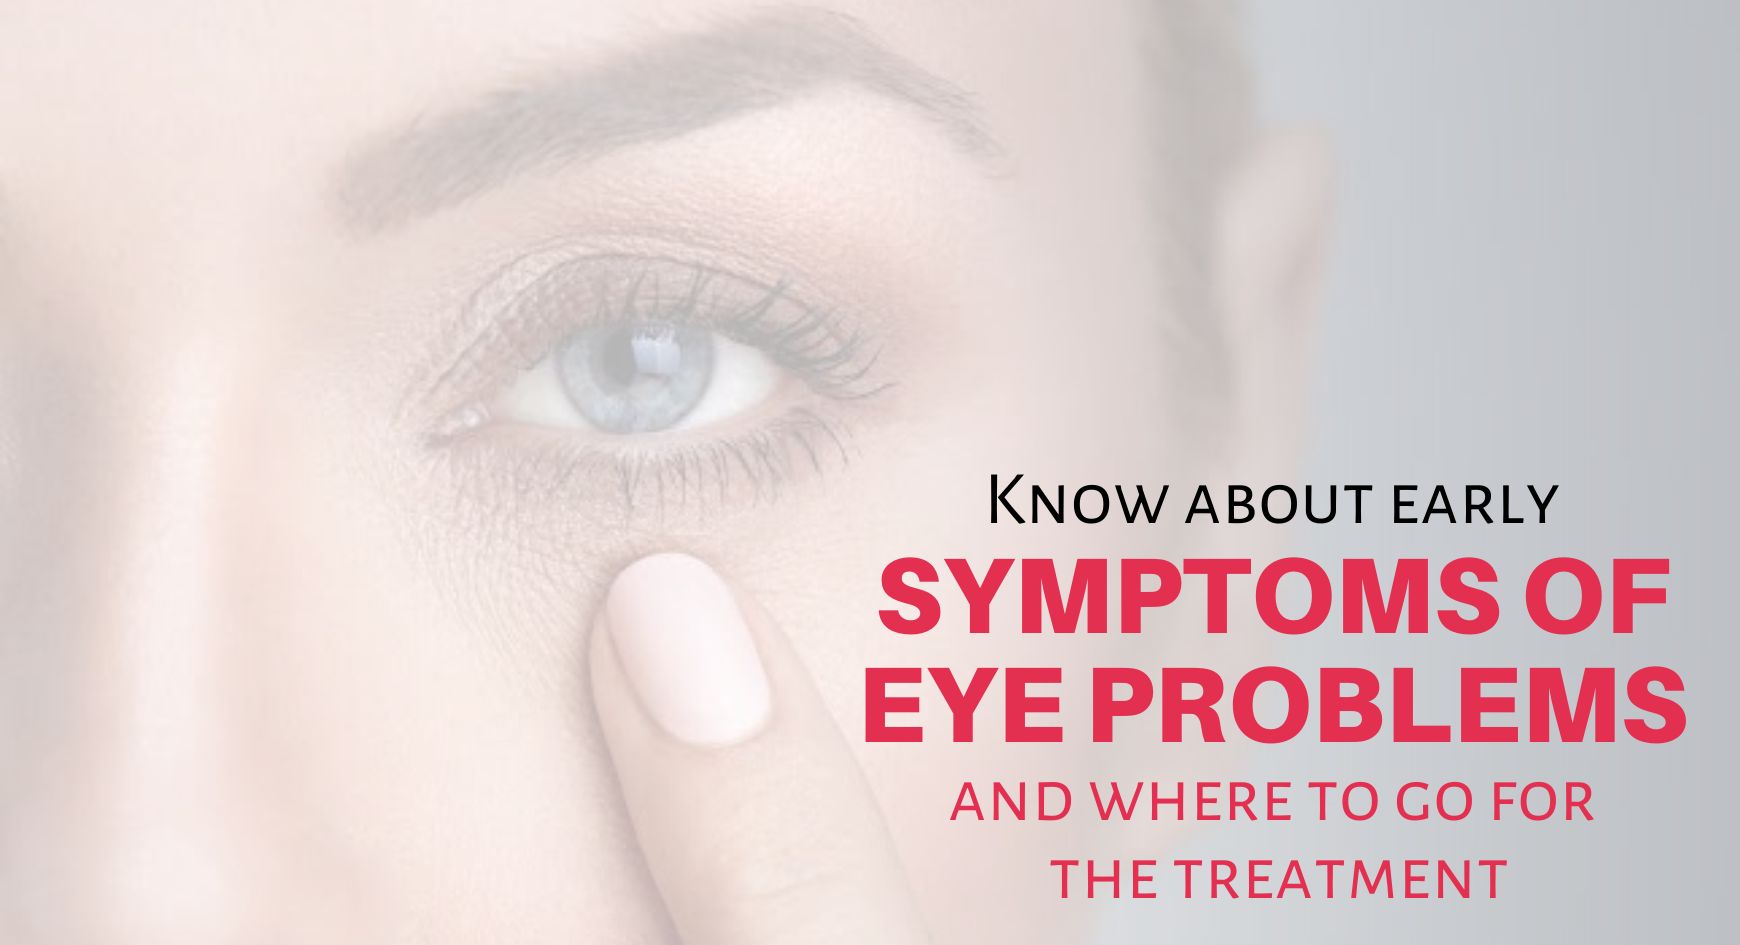 Know about early symptoms of eye problems and where to go for the treatment